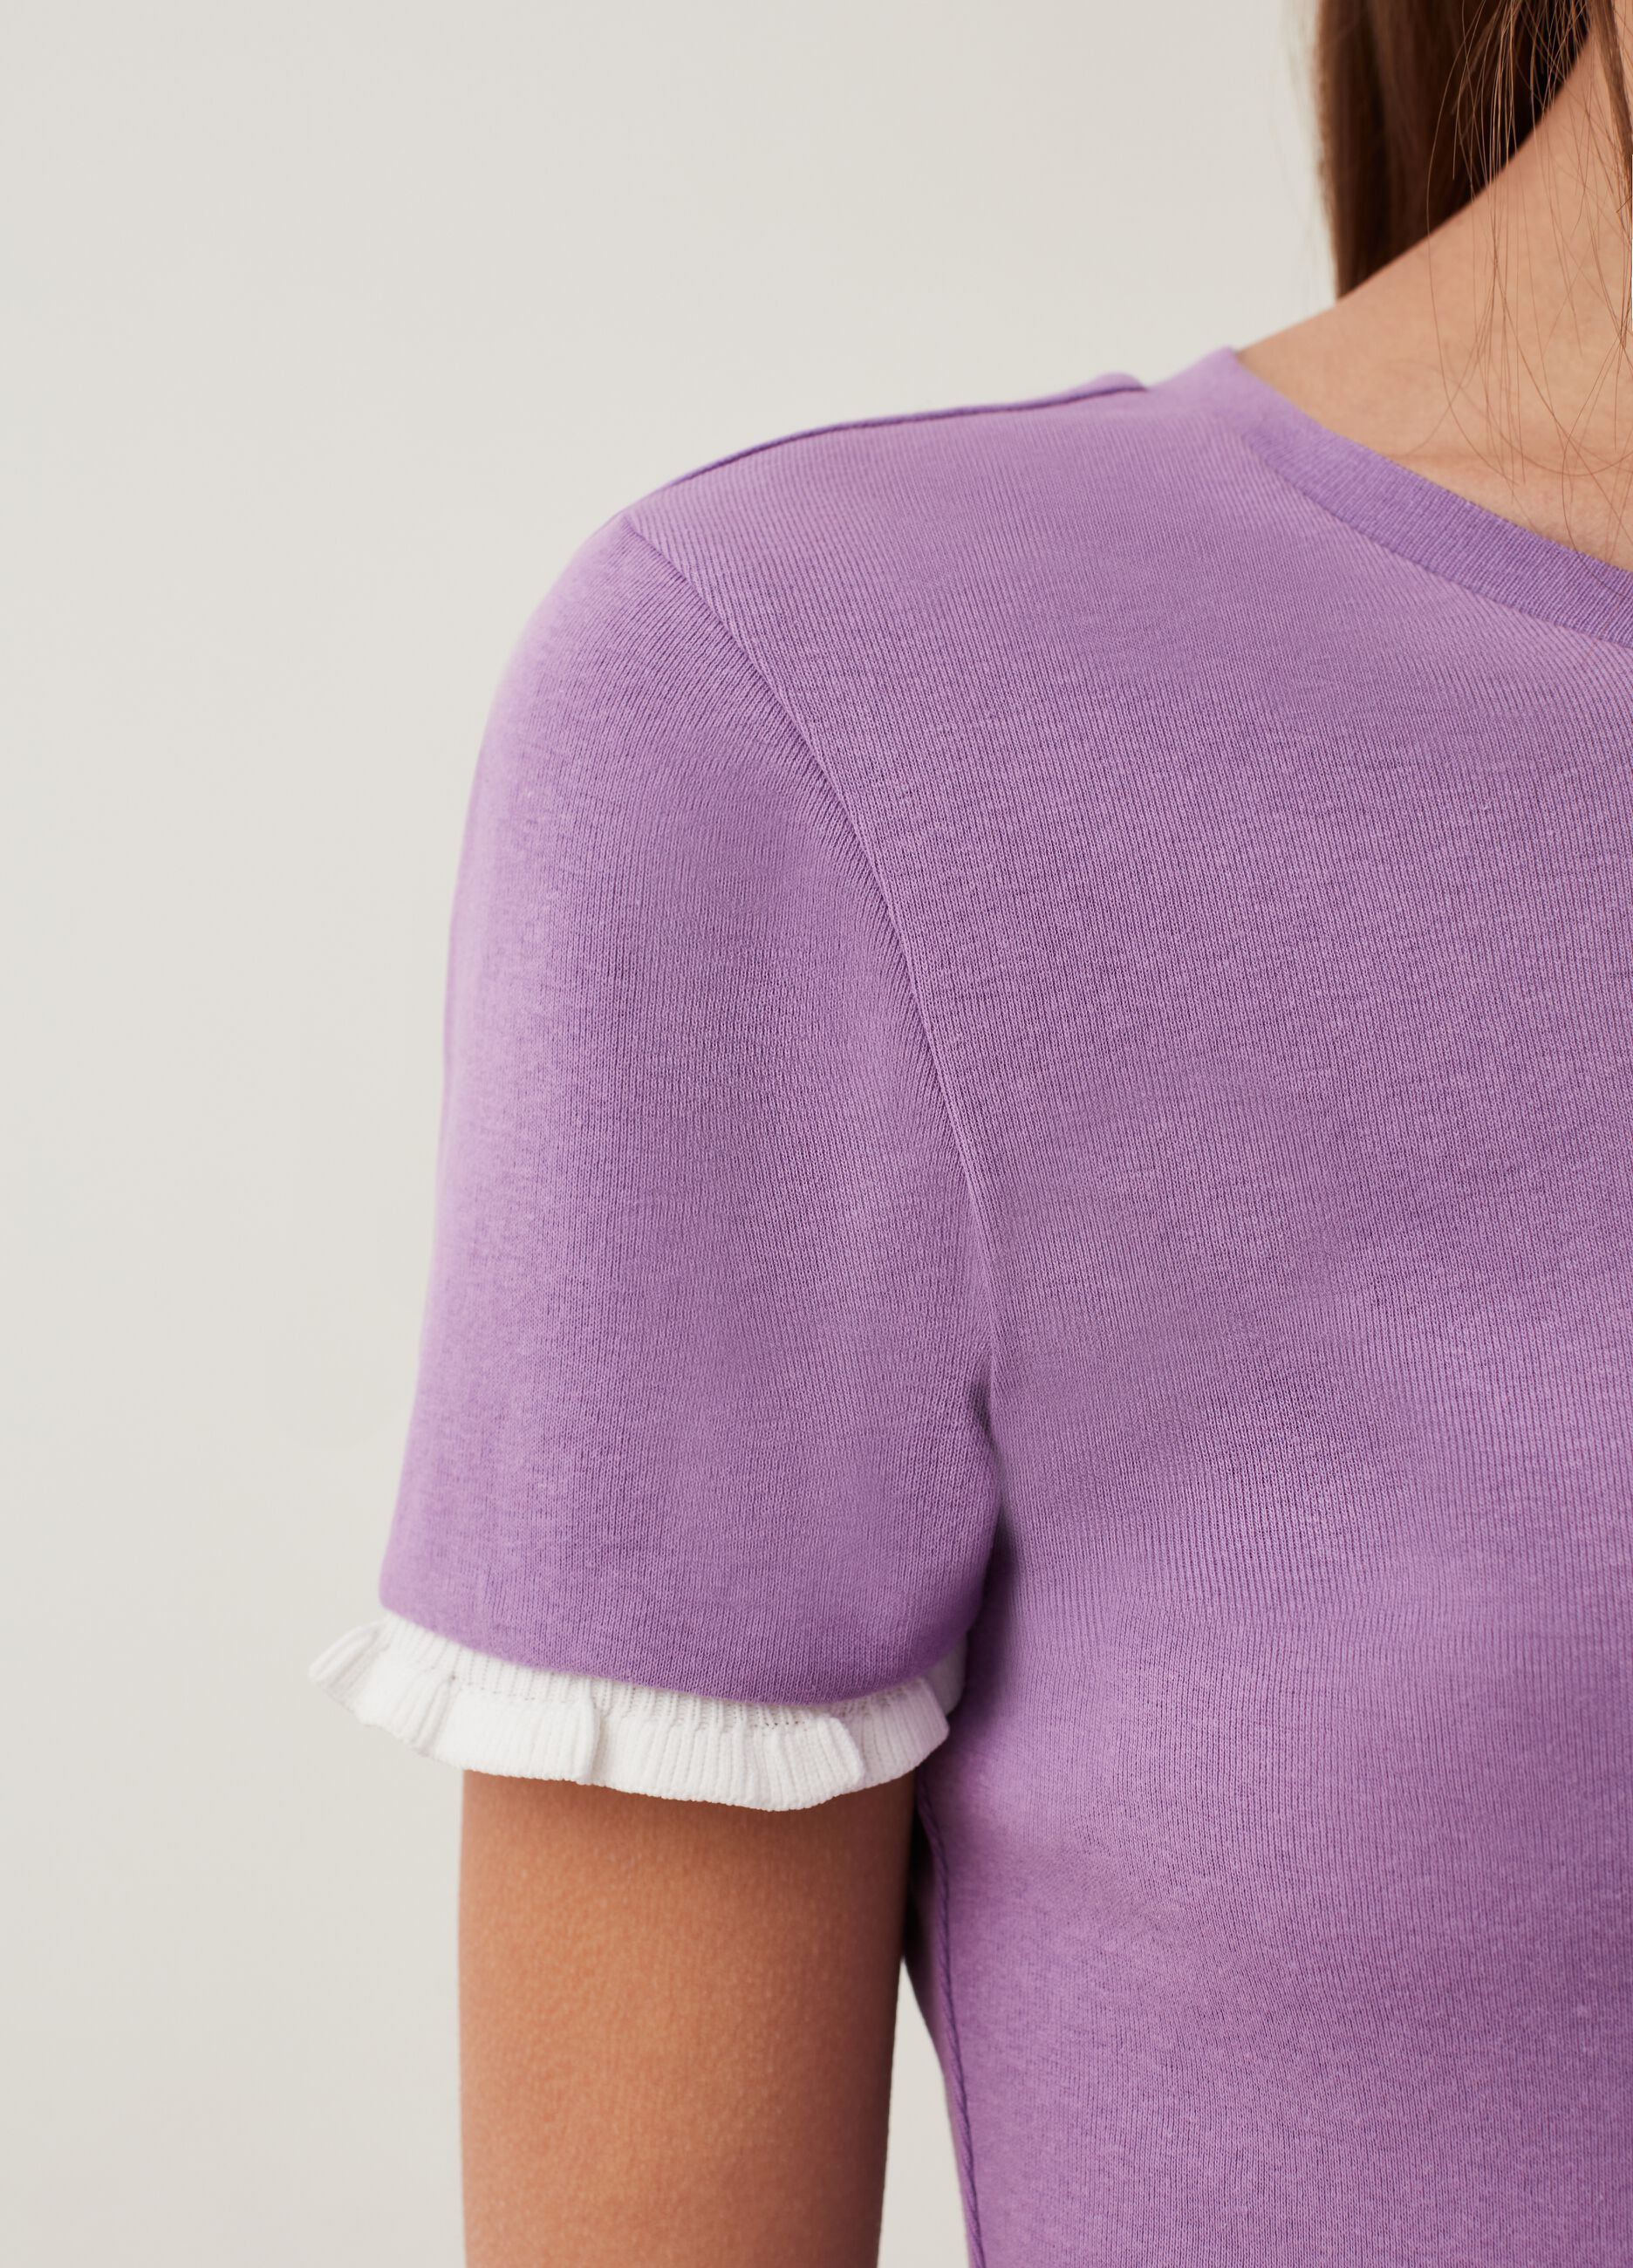 Cotton T-shirt with contrasting frill